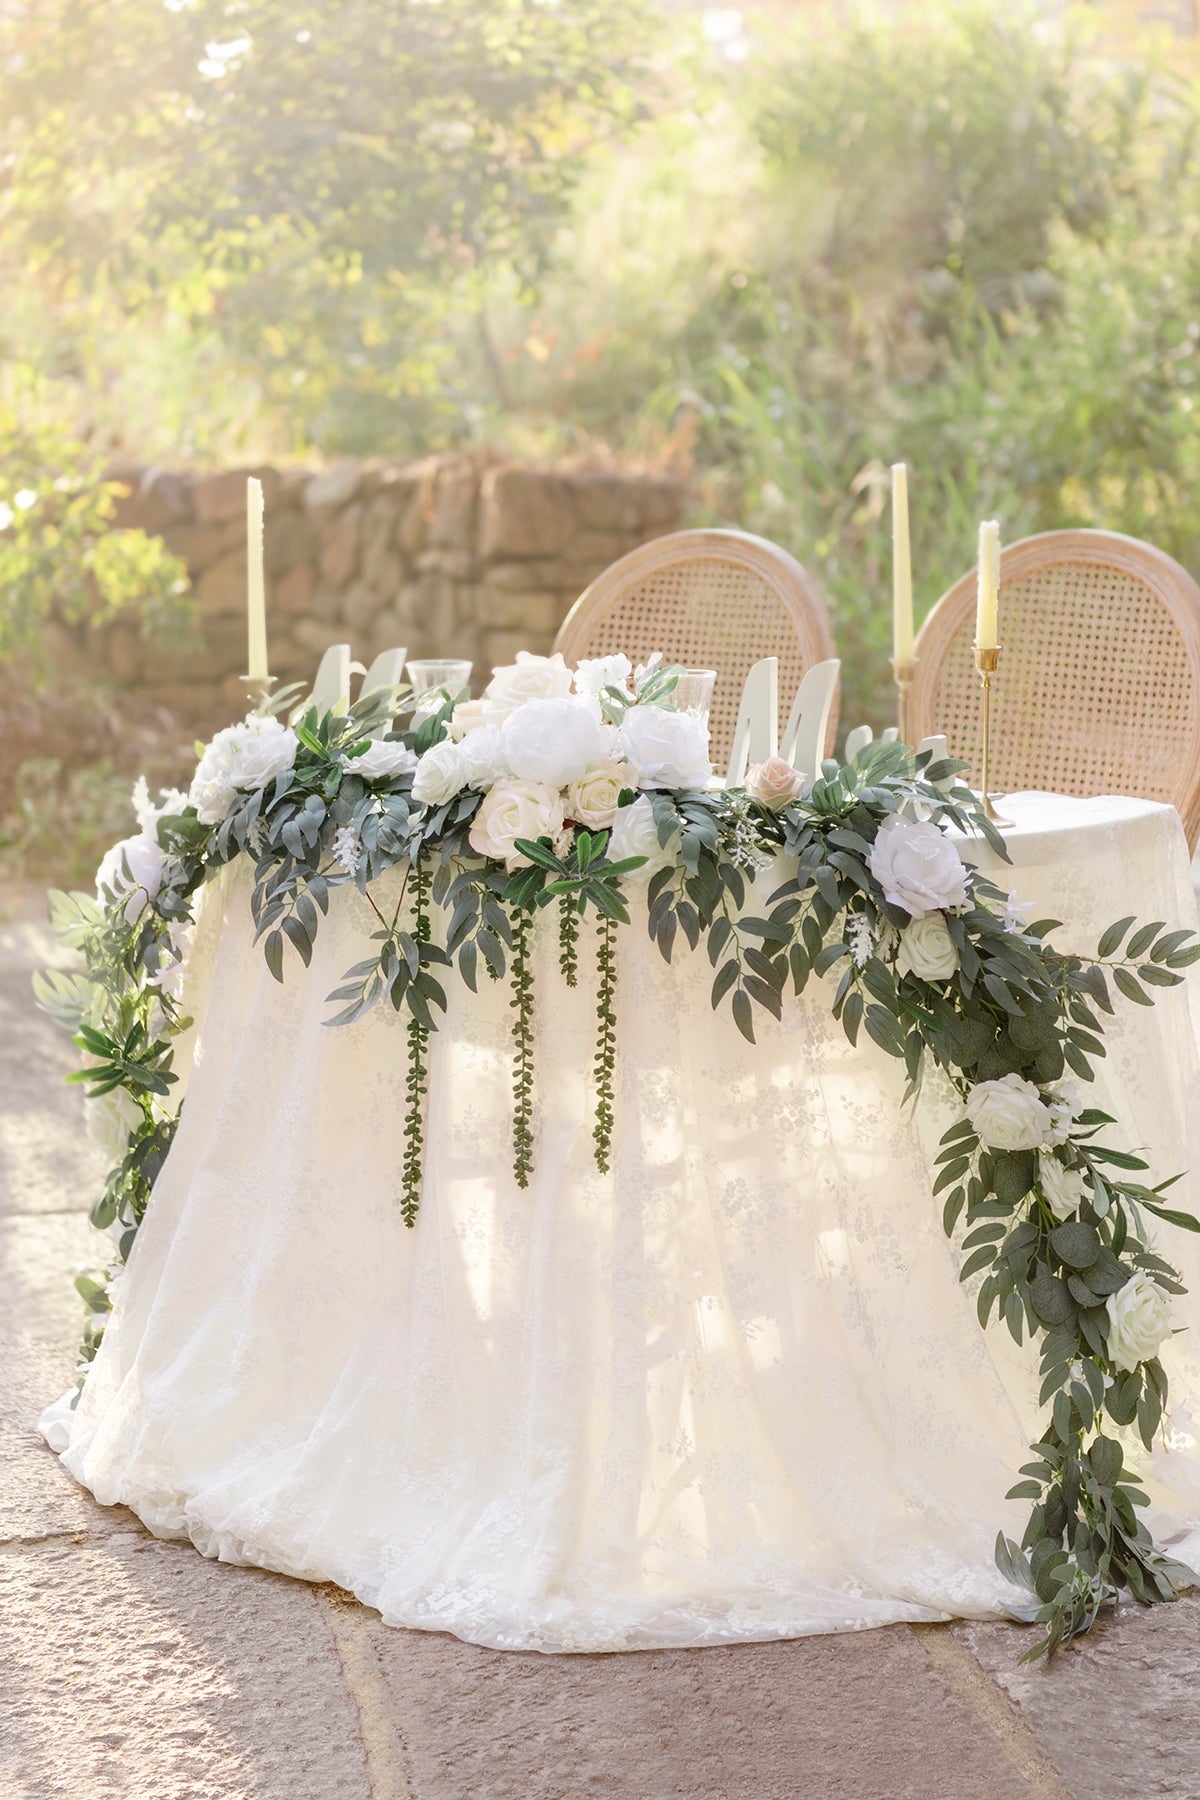 Wedding Head Table Decor  9ft Flower Garland for Sweetheart/Head Table -  White & Sage – Ling's Moment